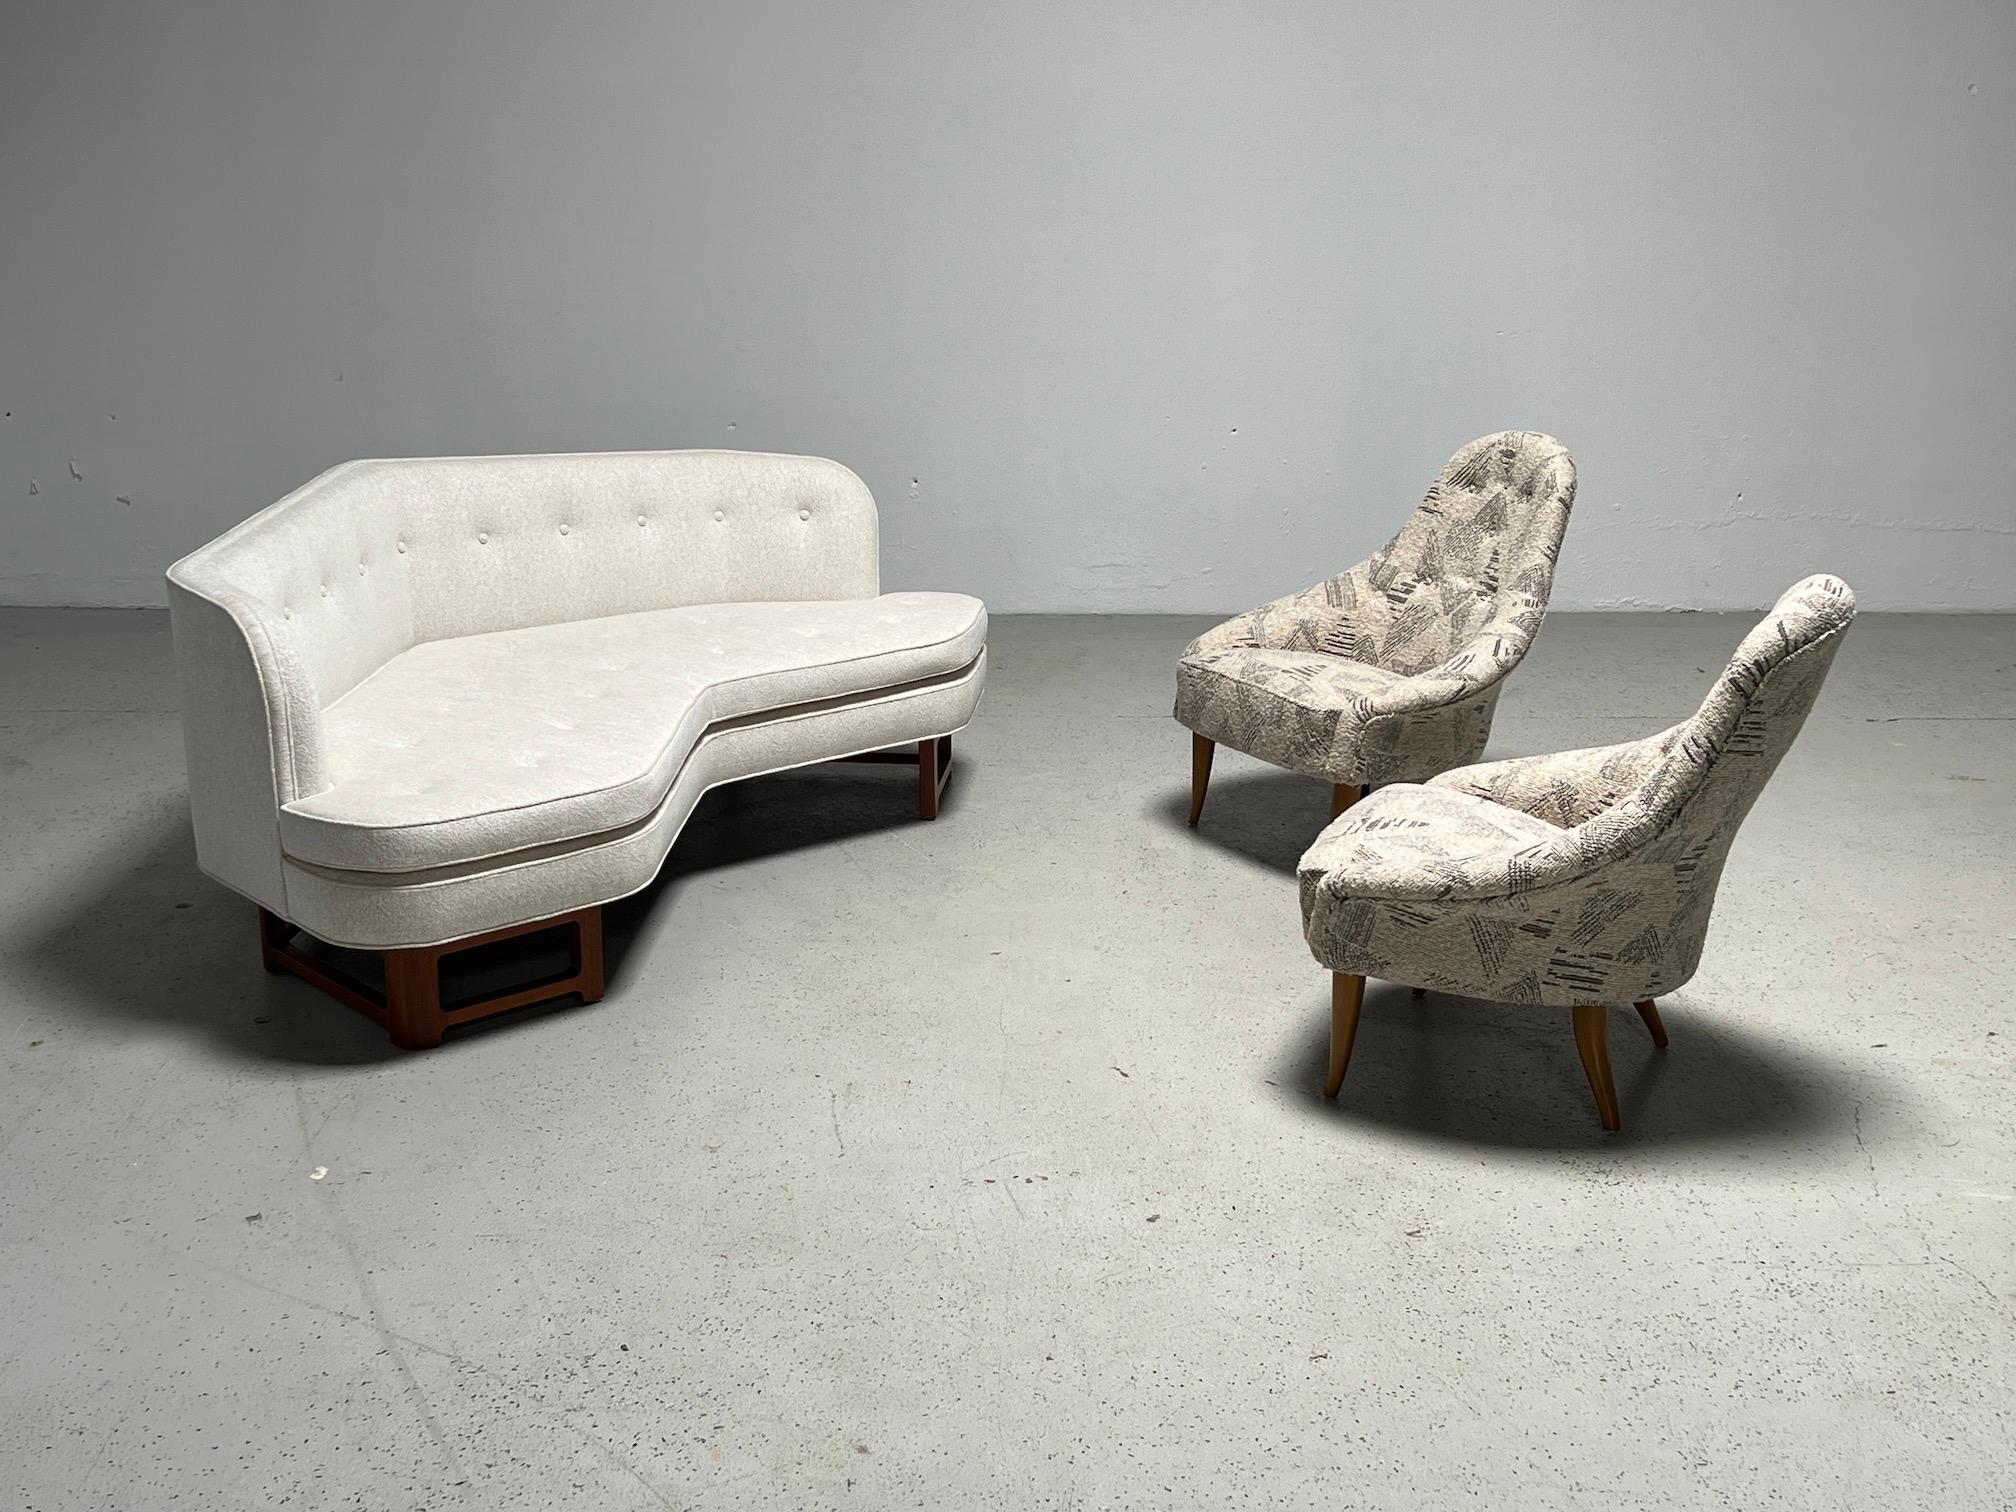 Pair of diminutive lounge chairs designed by Kerstin Ho¨rlin-Holmquist for Nordiska Kompaniet. Fully restored and upholstered in Holly Hunt / Facet / Pewter fabric.